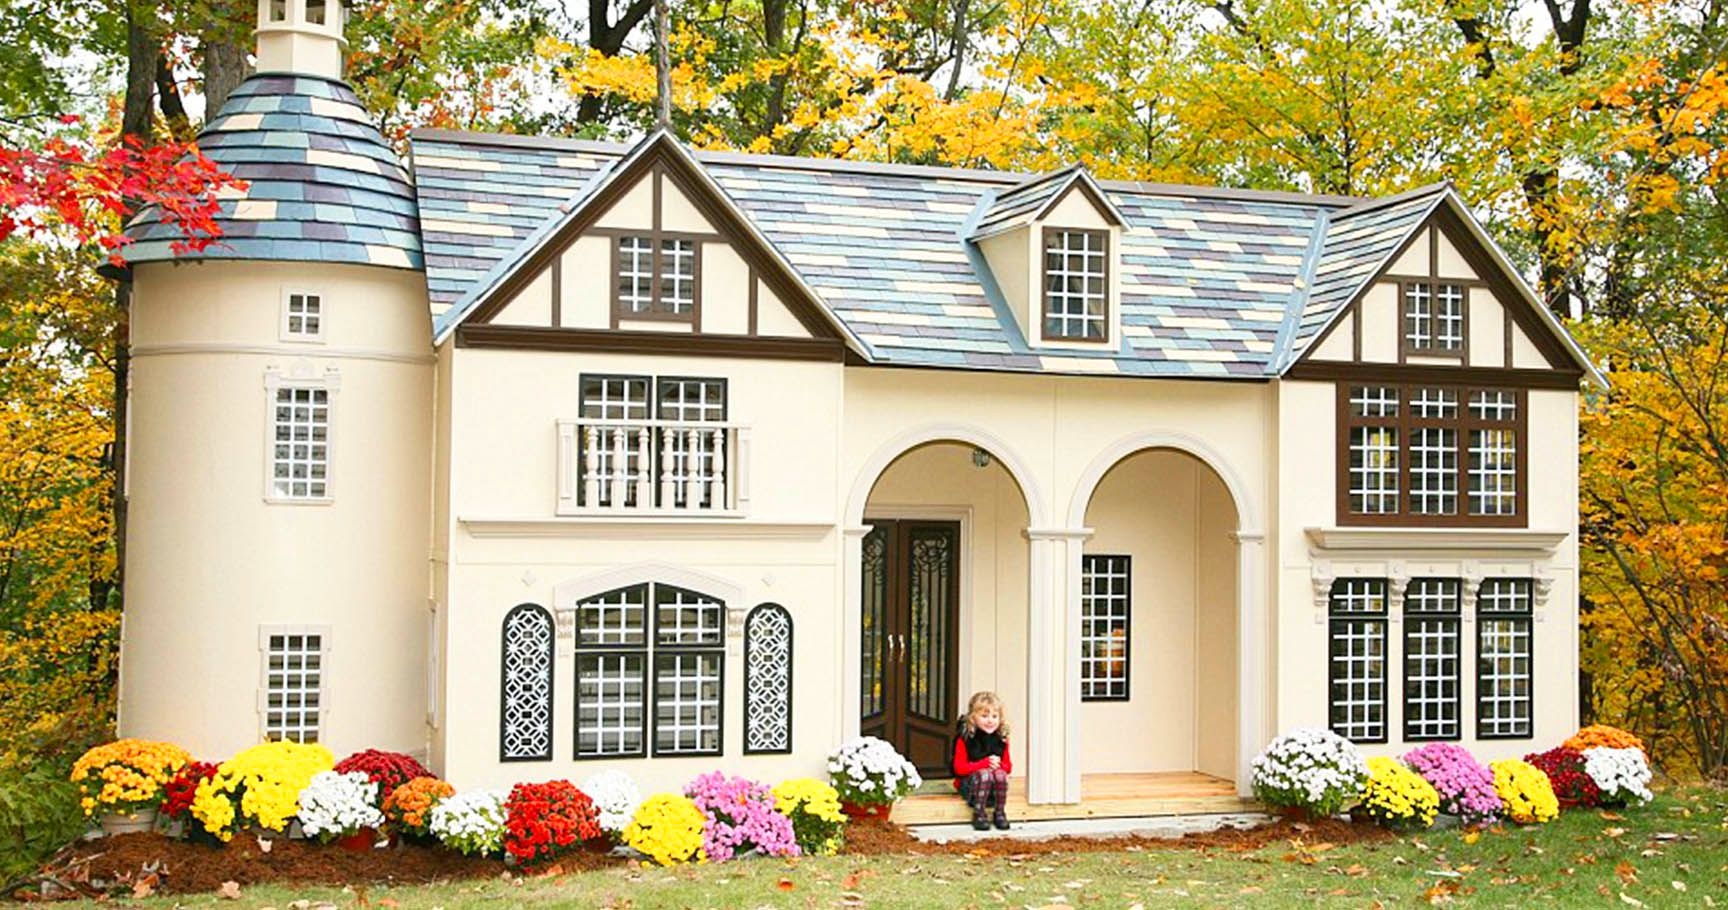 Mansion playhouse incredible playhouse features built in bookshelves